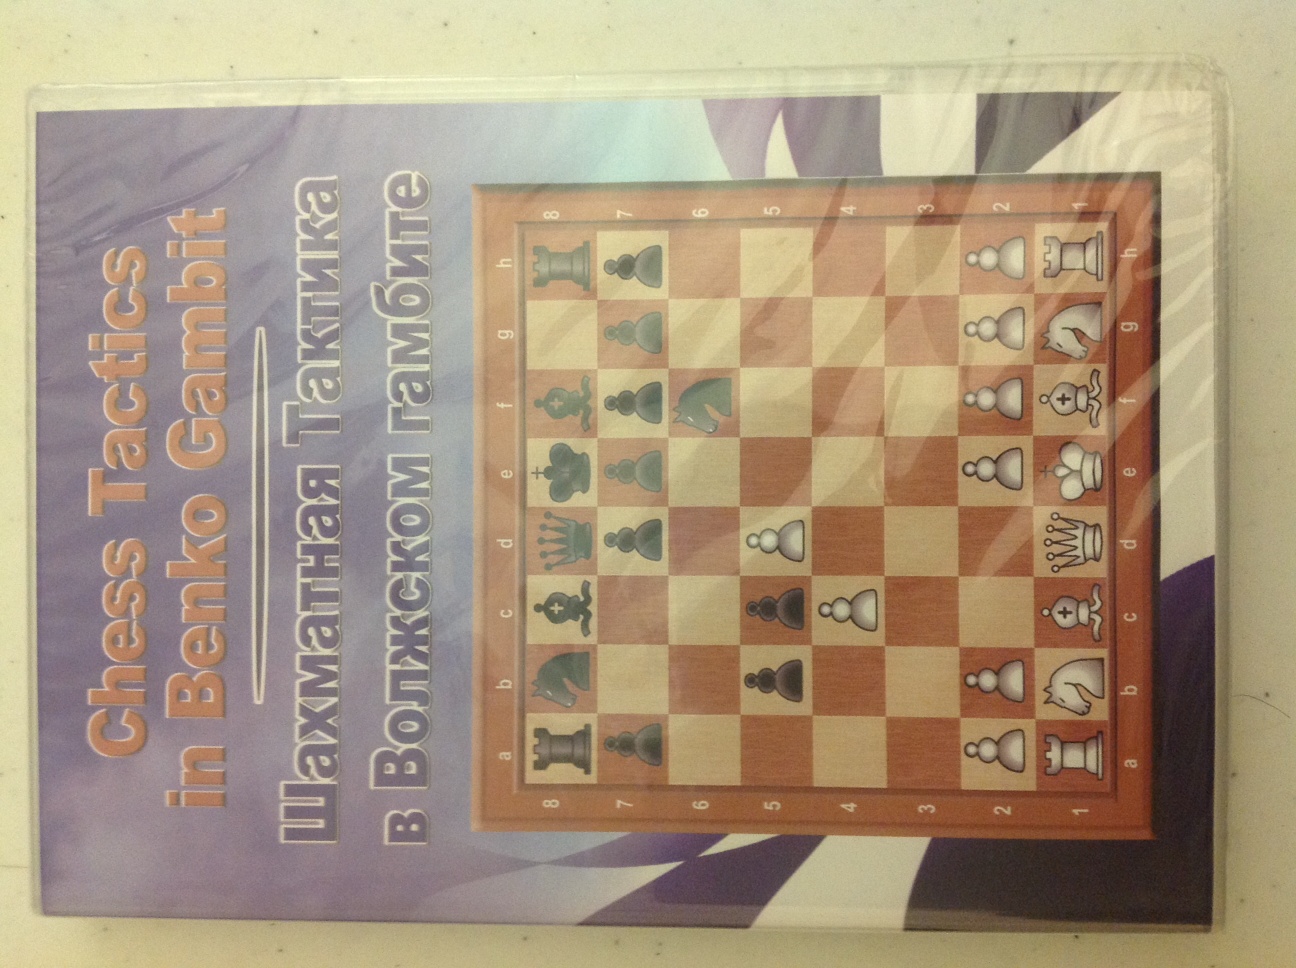 Miniatures in the Ruy Lopez: Main Lines - Winning Quickly at Chess